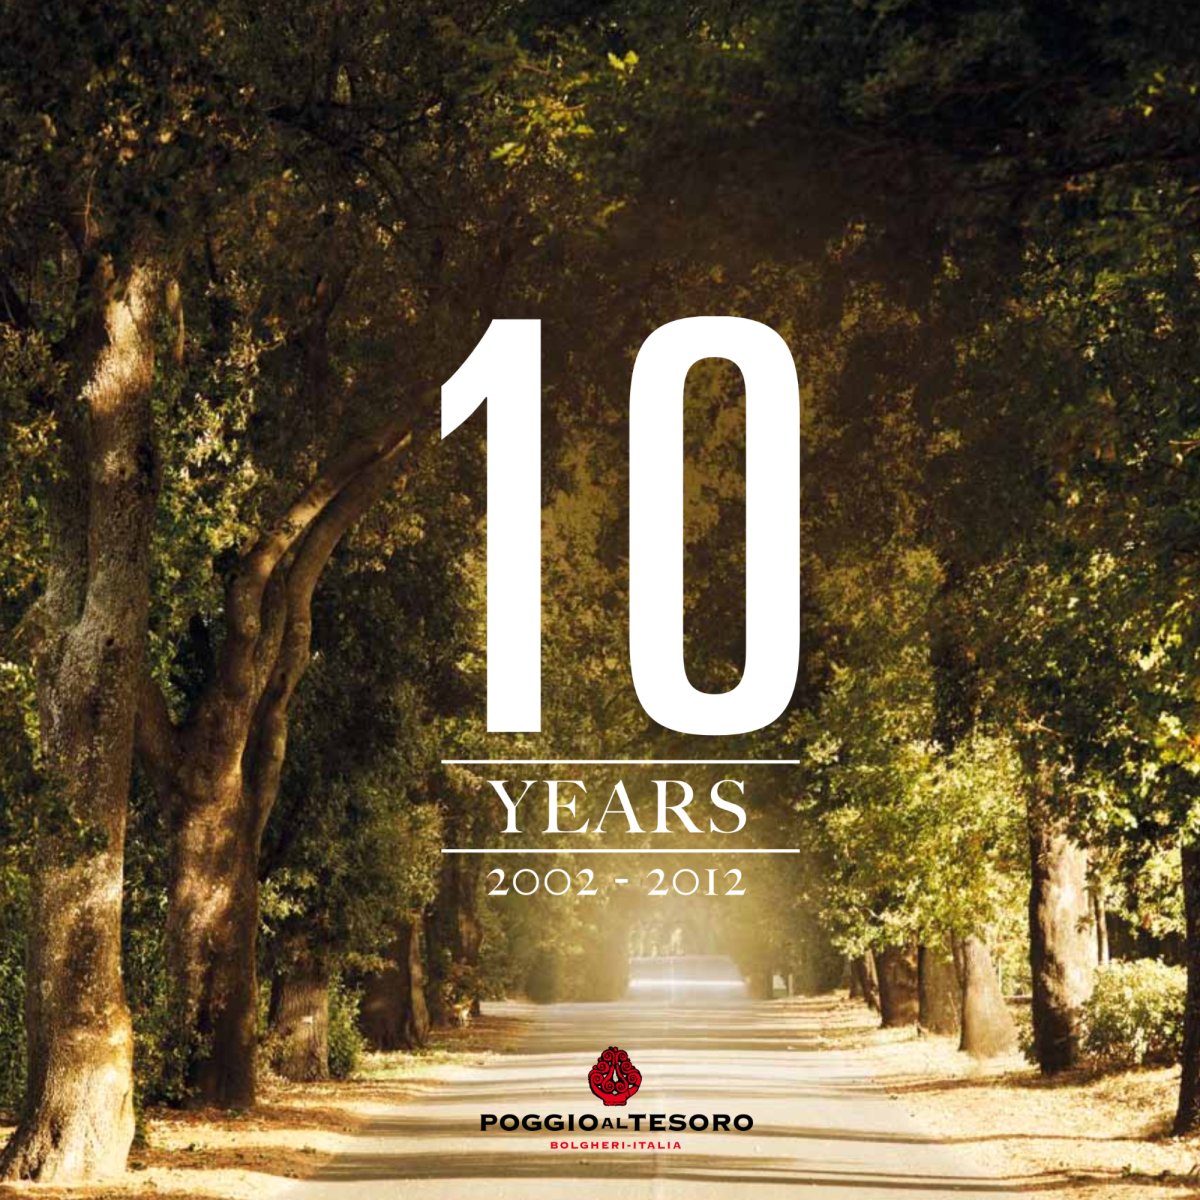 2002 - 2012: 10 years of passion, perfumes and love for this land and its fruits